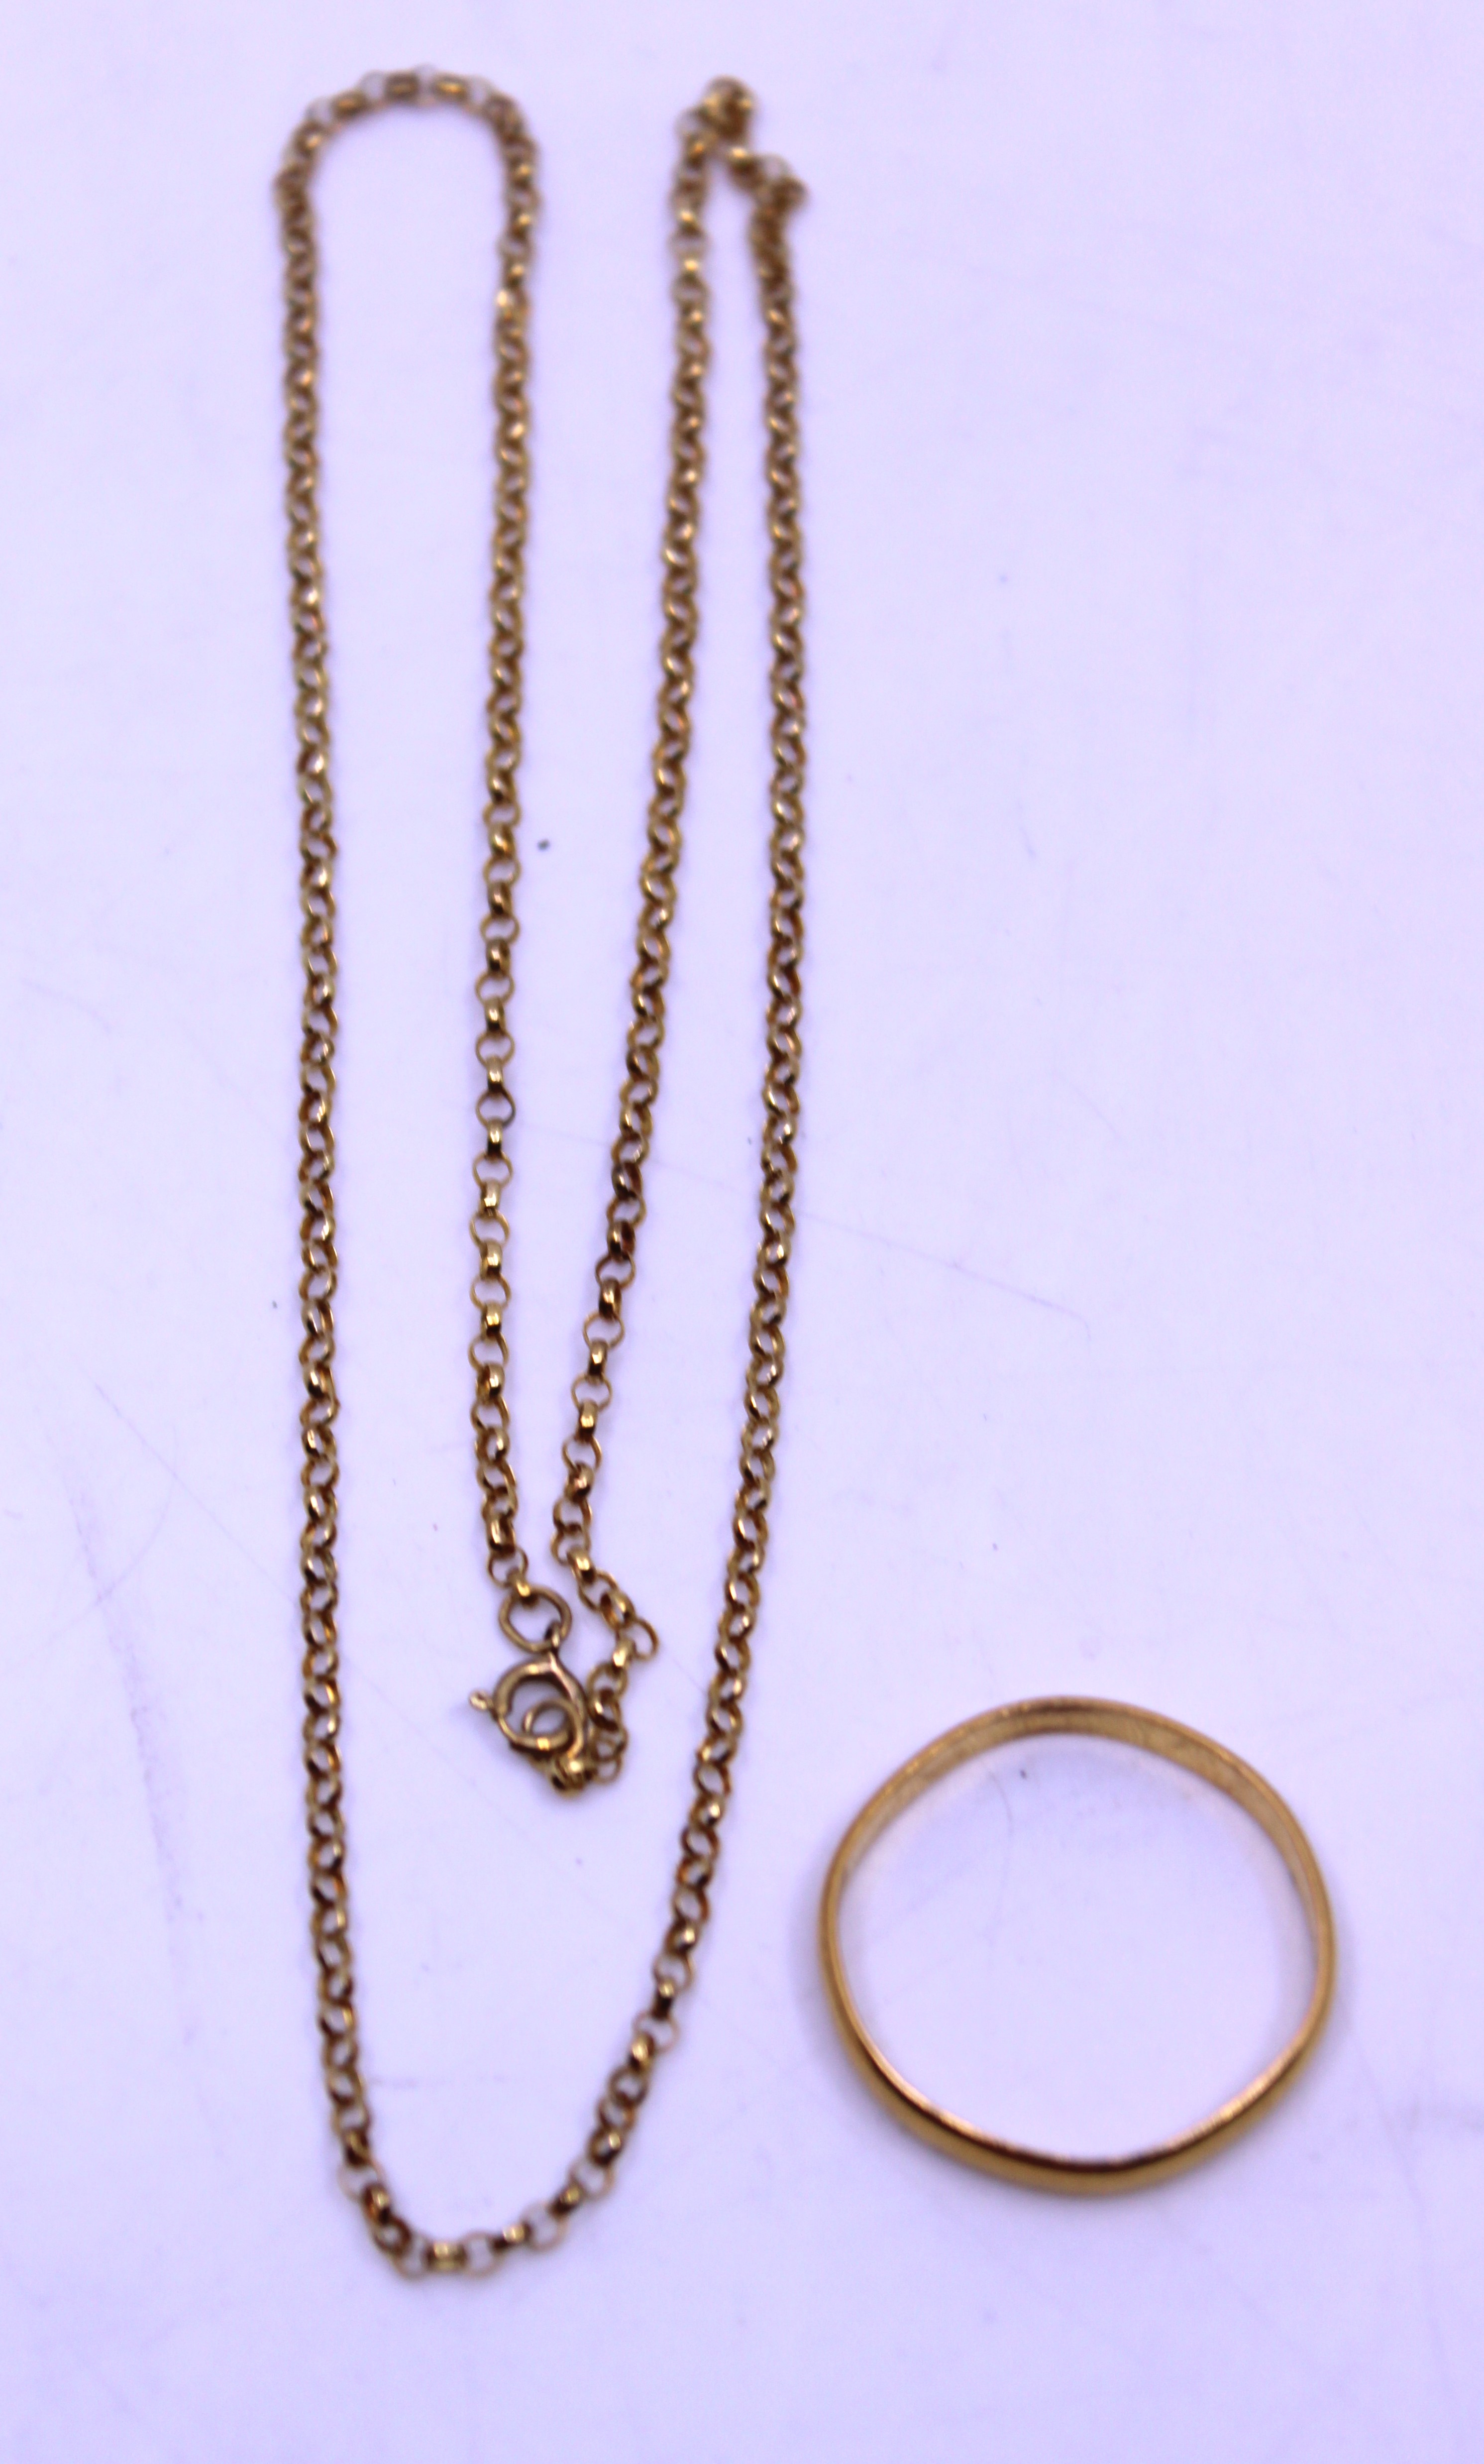 9ct Yellow Gold Fine Belcher Chain and a 22ct Yellow Gold Wedding Band.  The 9ct Yellow Gold Fine